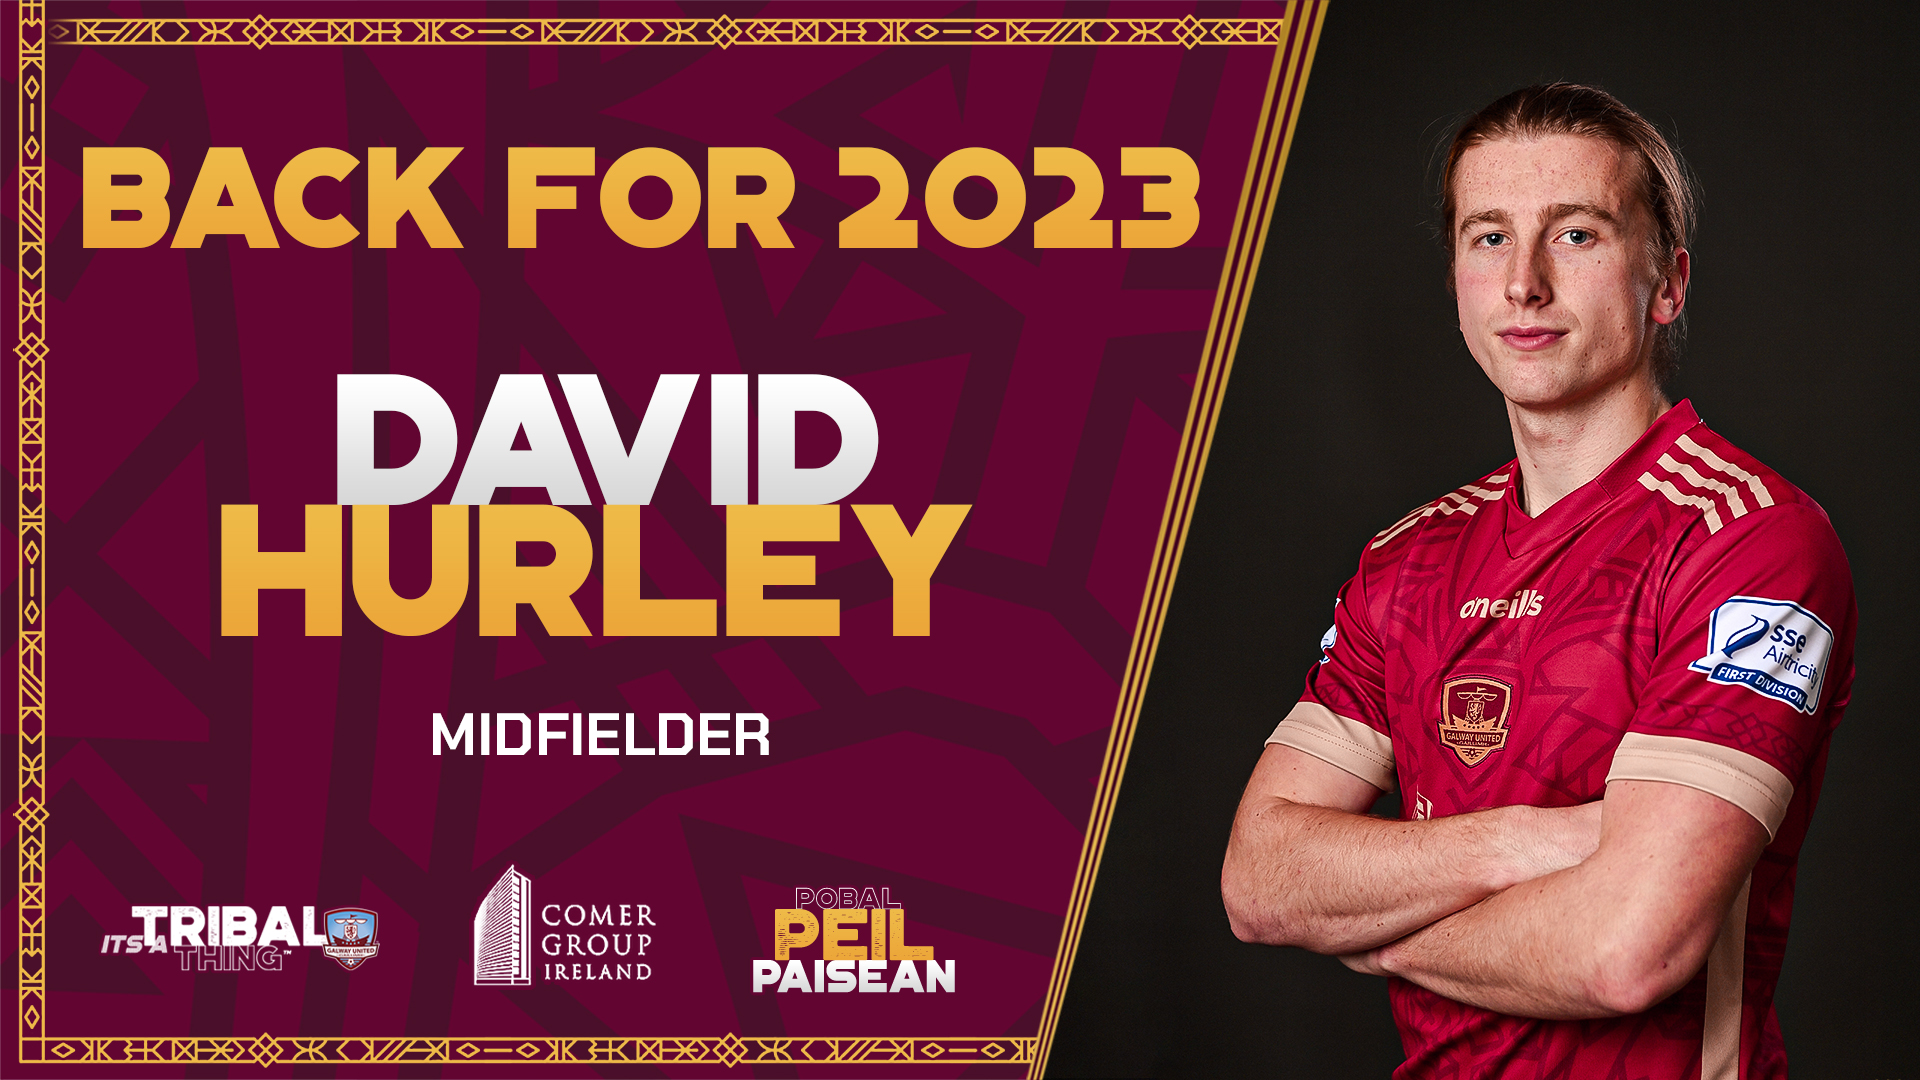 David Hurley re-signs for Galway United ahead of the 2023 season.